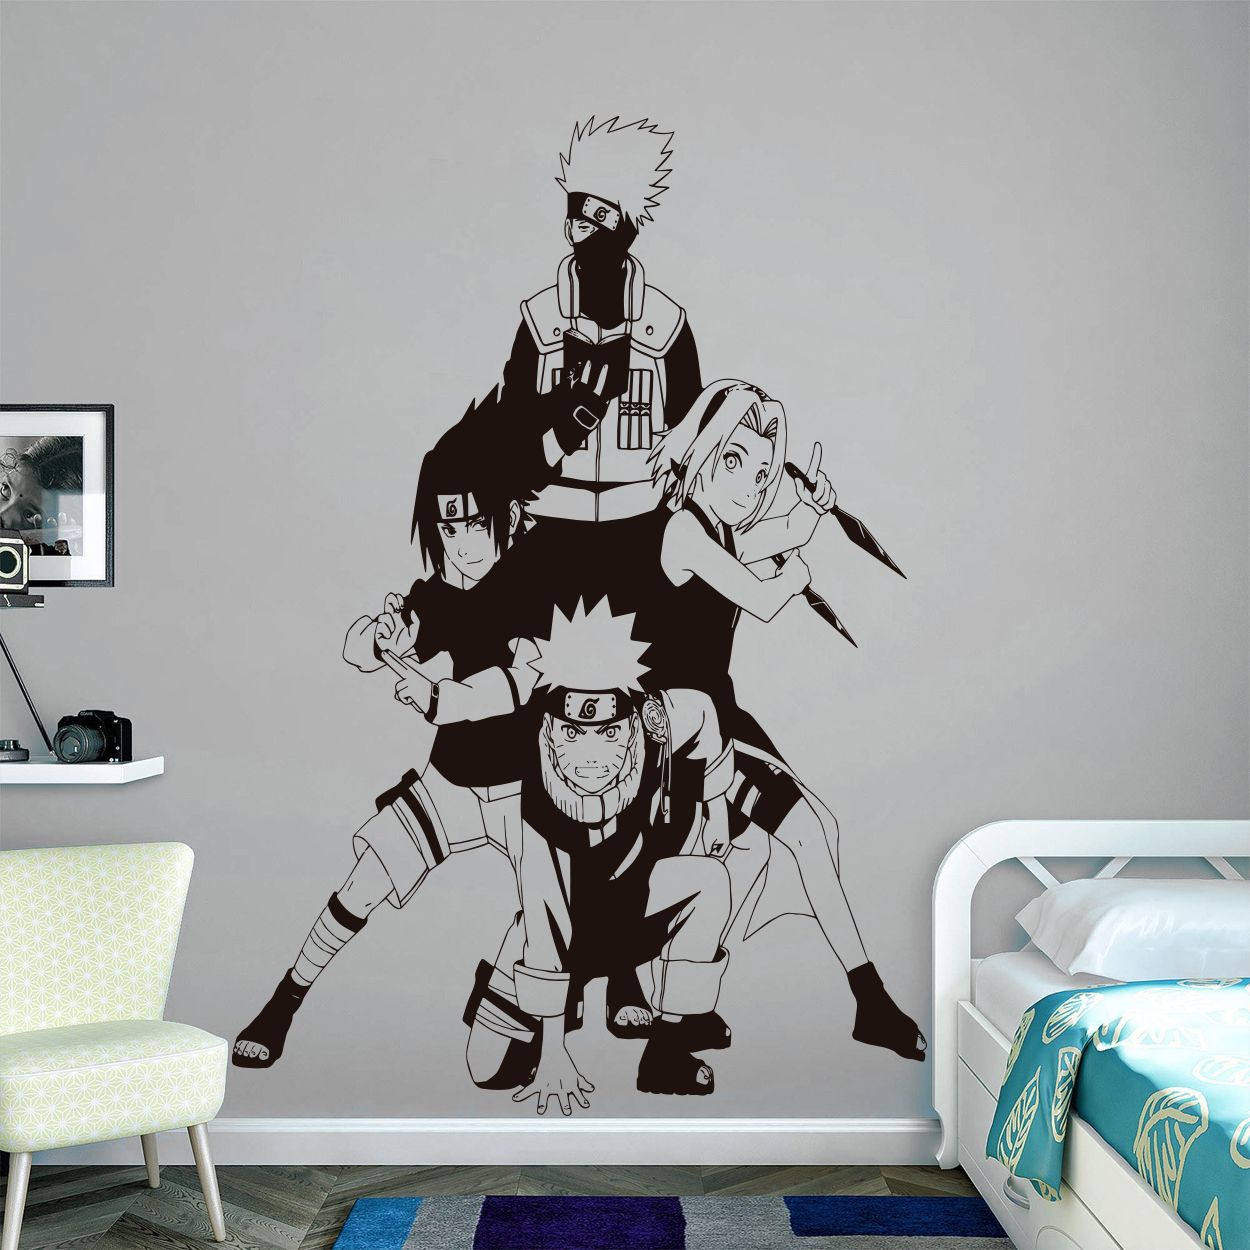 2 Pcs Large Anime Wall Decal Realistic 3D Comics Poster Decals Vinyl  Wallpaper Kids'bedroom Living Room Playroom Nursery Wall Decor Gift  Supplies(15.7“x35.4